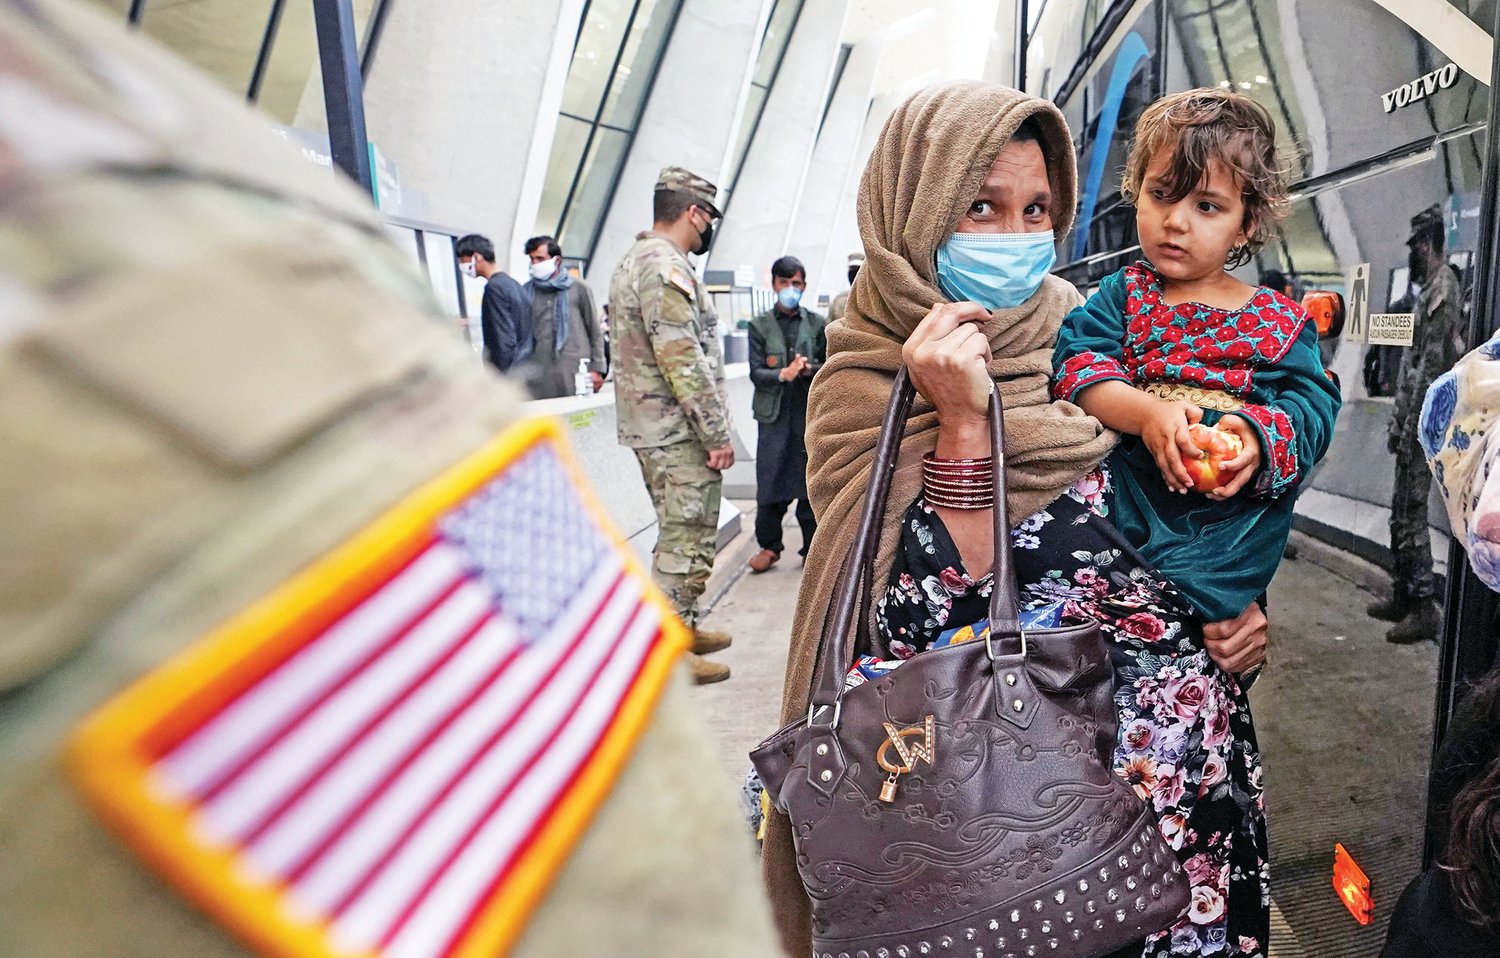 Upon their arrival, refugees from Afghanistan board a bus at Dulles International Airport in Dulles, Virginia., Sept. 1, 2021, taking them to a processing center.